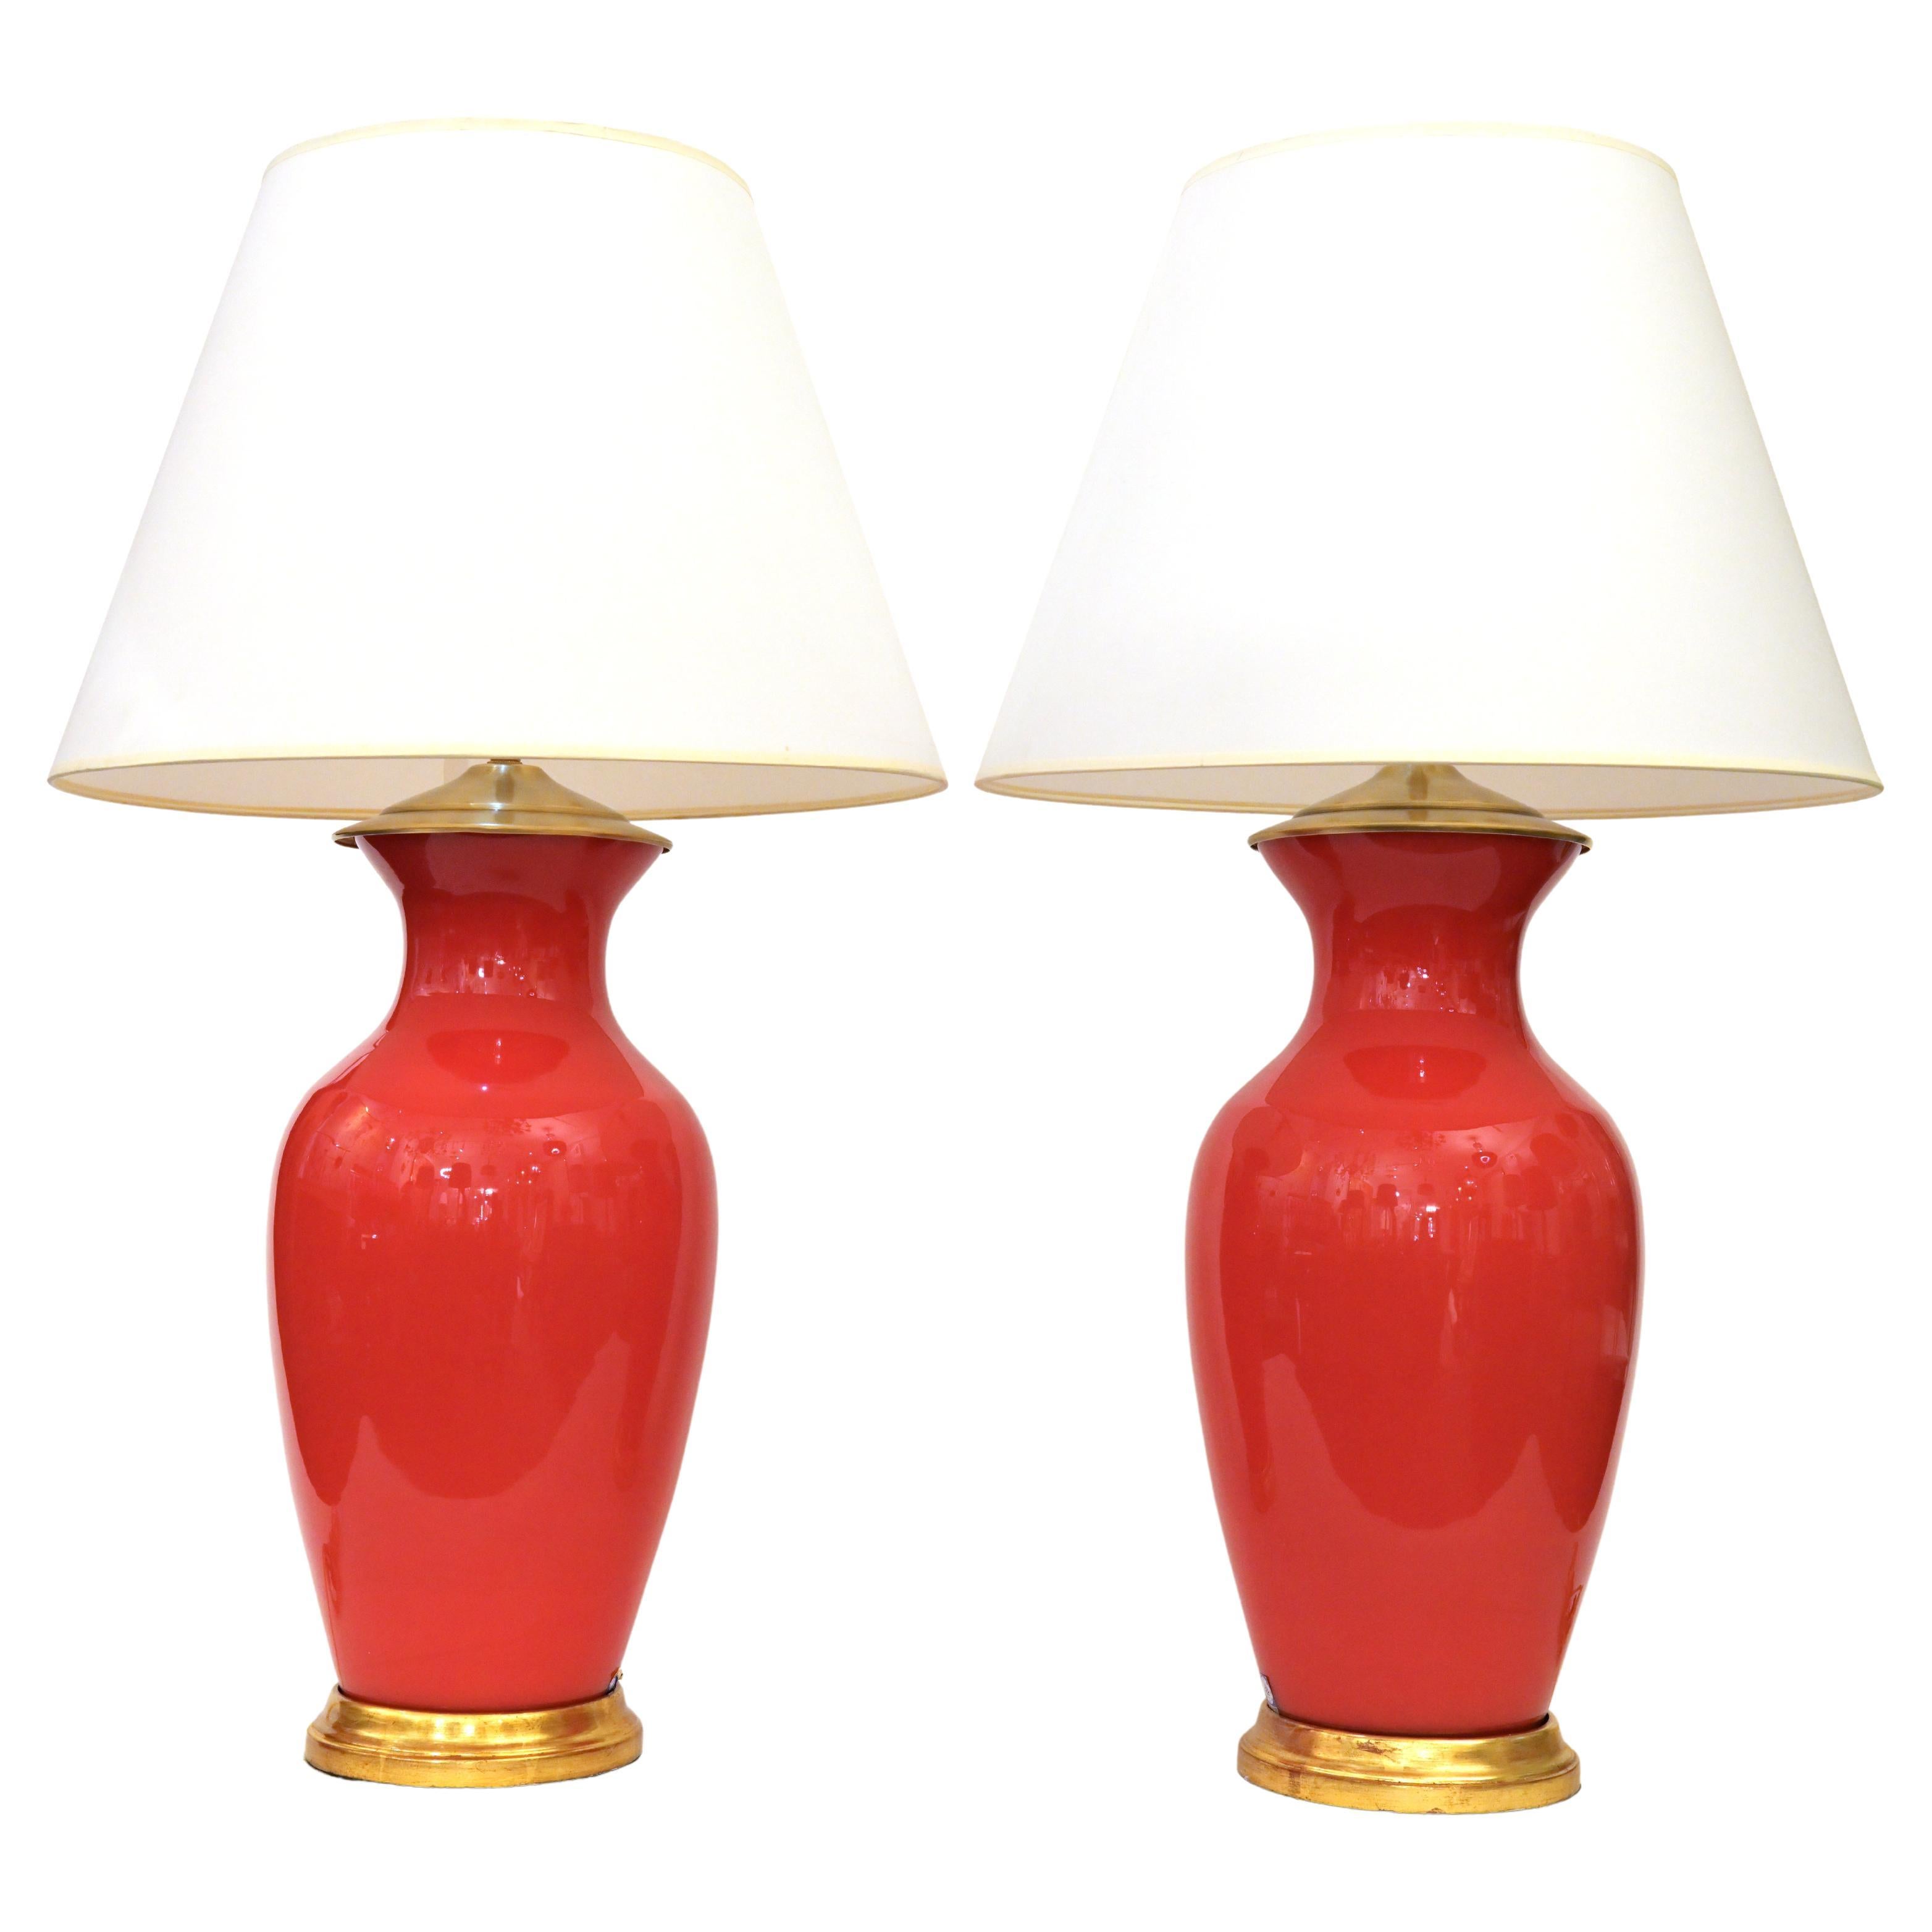 Pair of Coral Murano Glass Table Lamps by David Duncan Studio